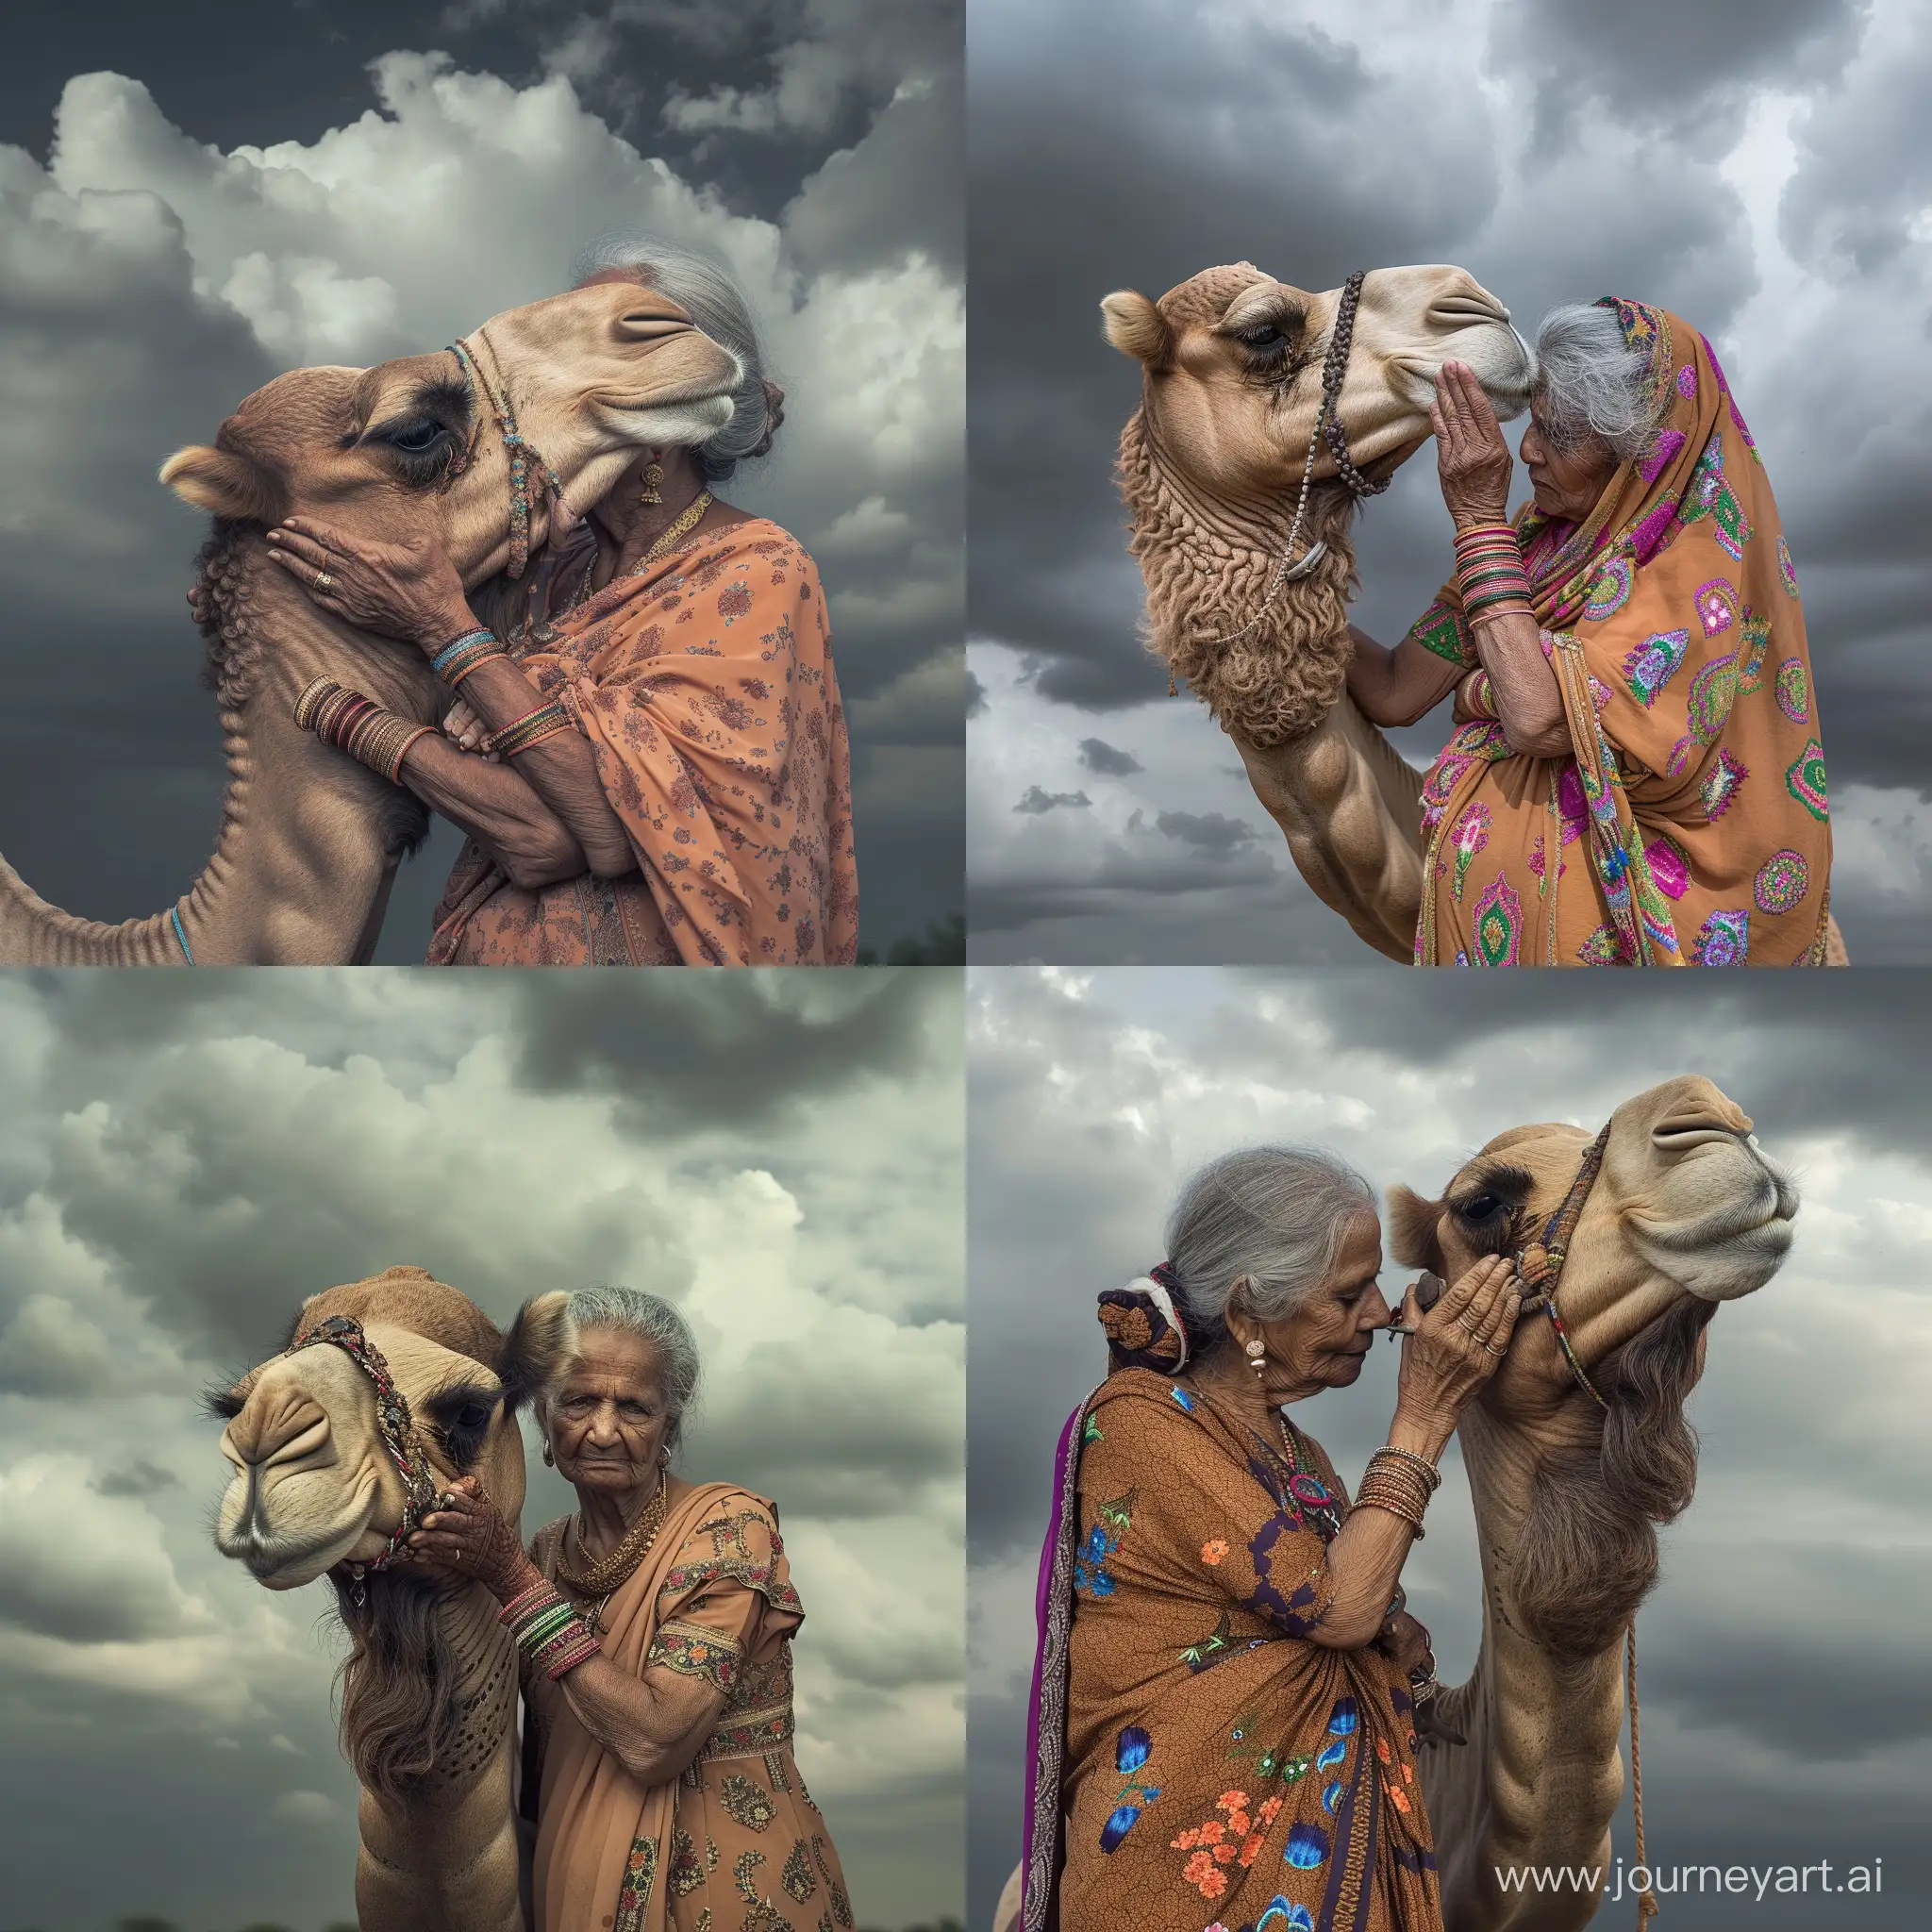 Elderly-Rabari-Woman-Graciously-Holds-Camels-Face-Under-Cloudy-Sky